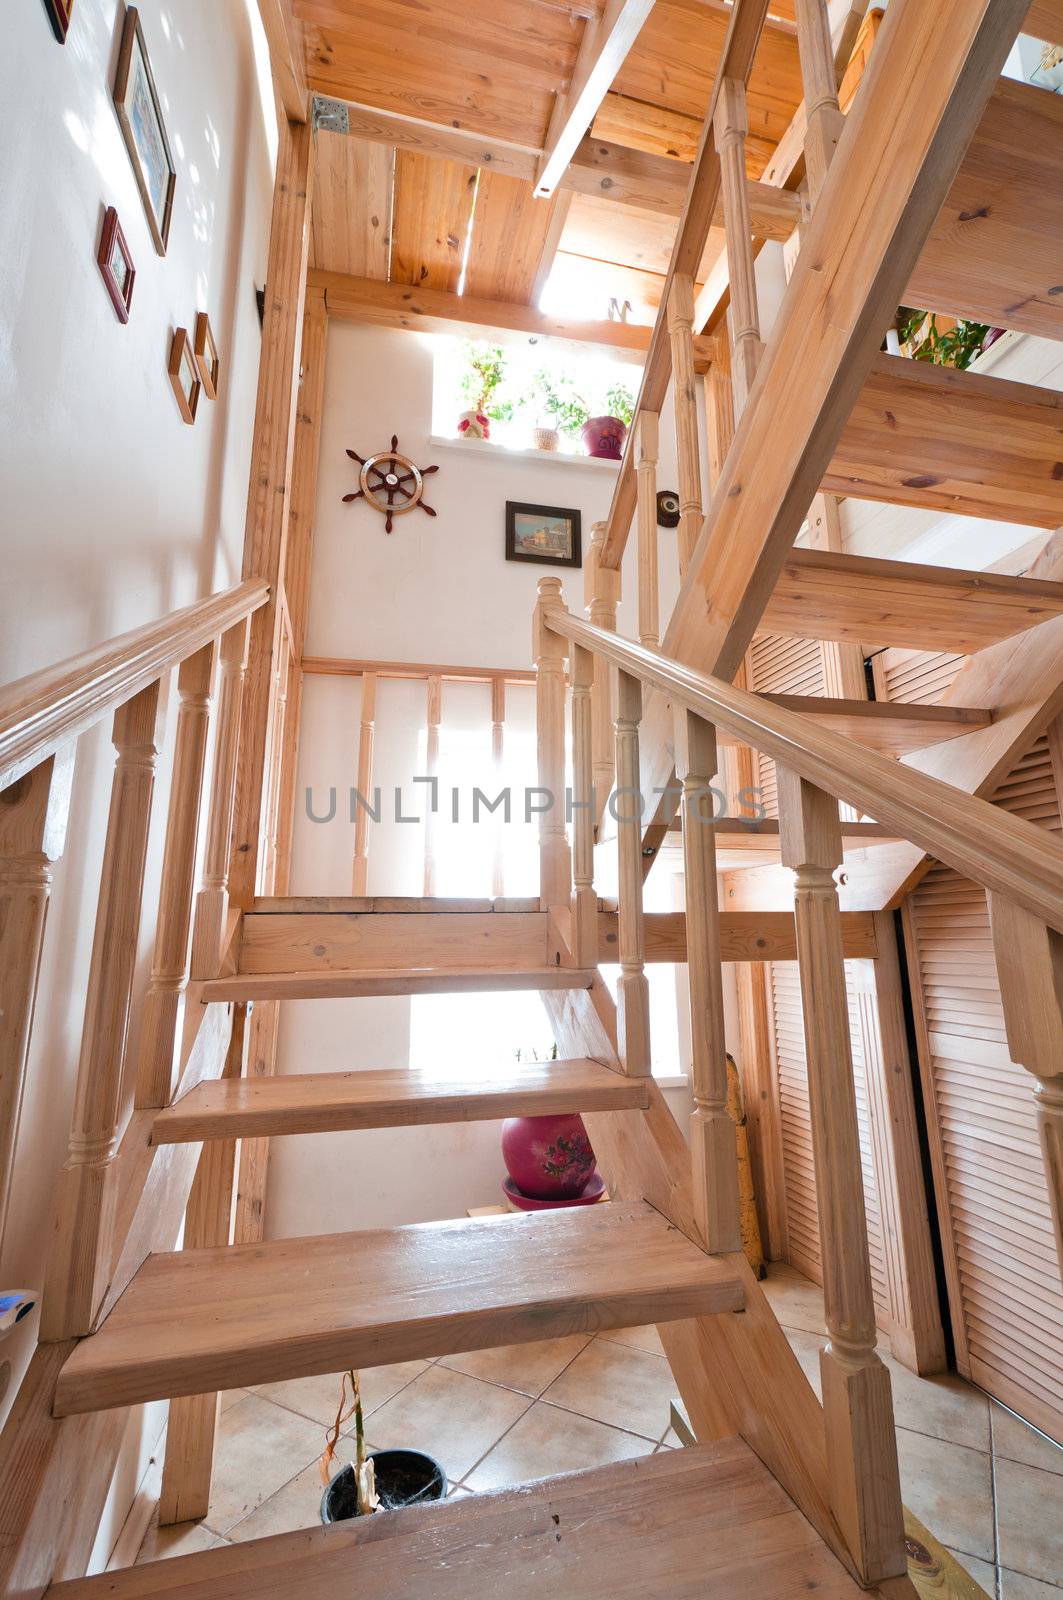 Wooden stairs inside house, colored beige with paintings on walls